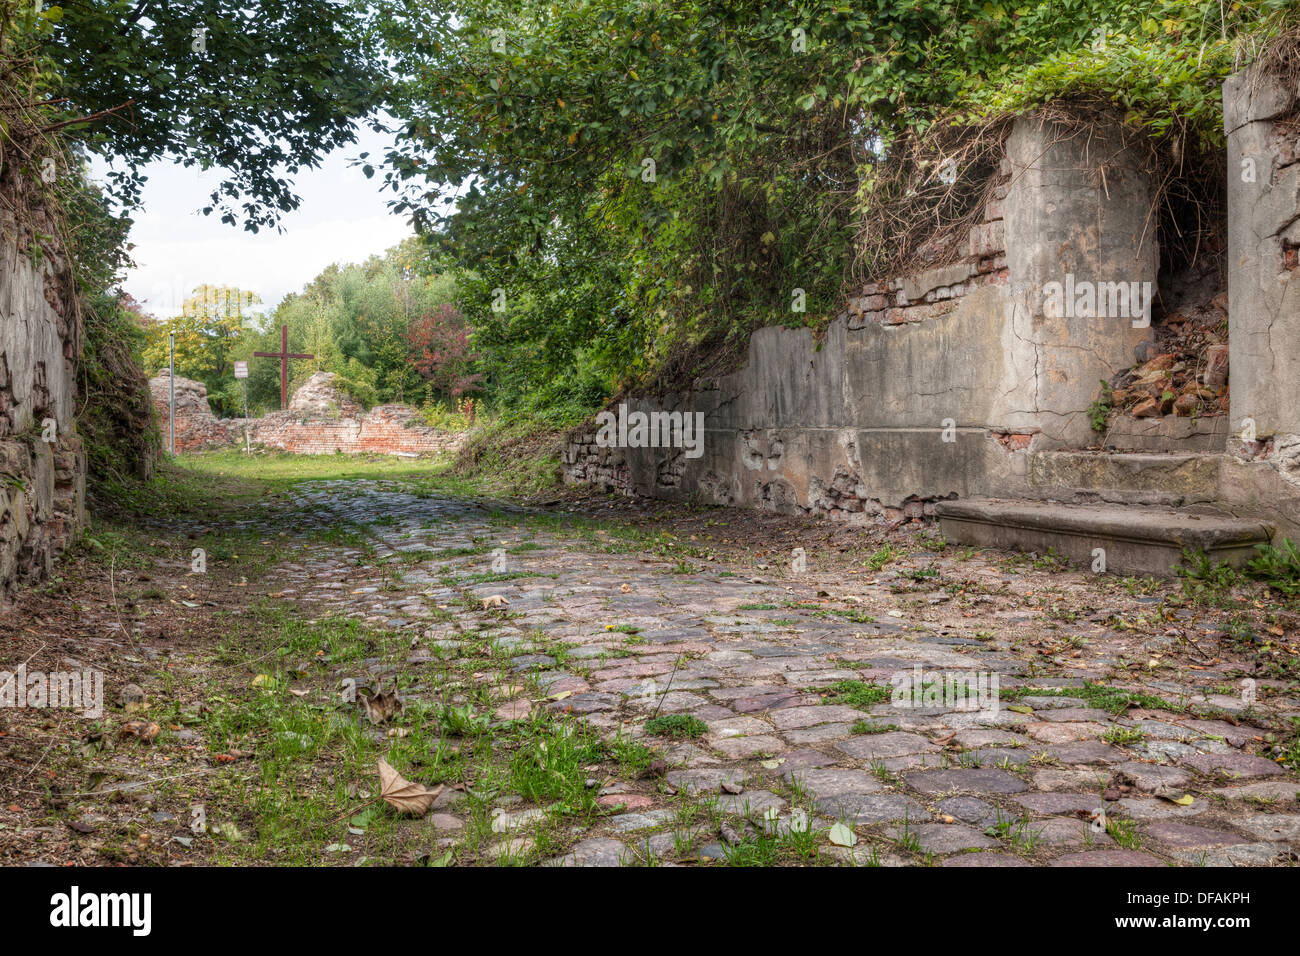 Derelict street in the Old Town of Kostrzyn, Poland Stock Photo